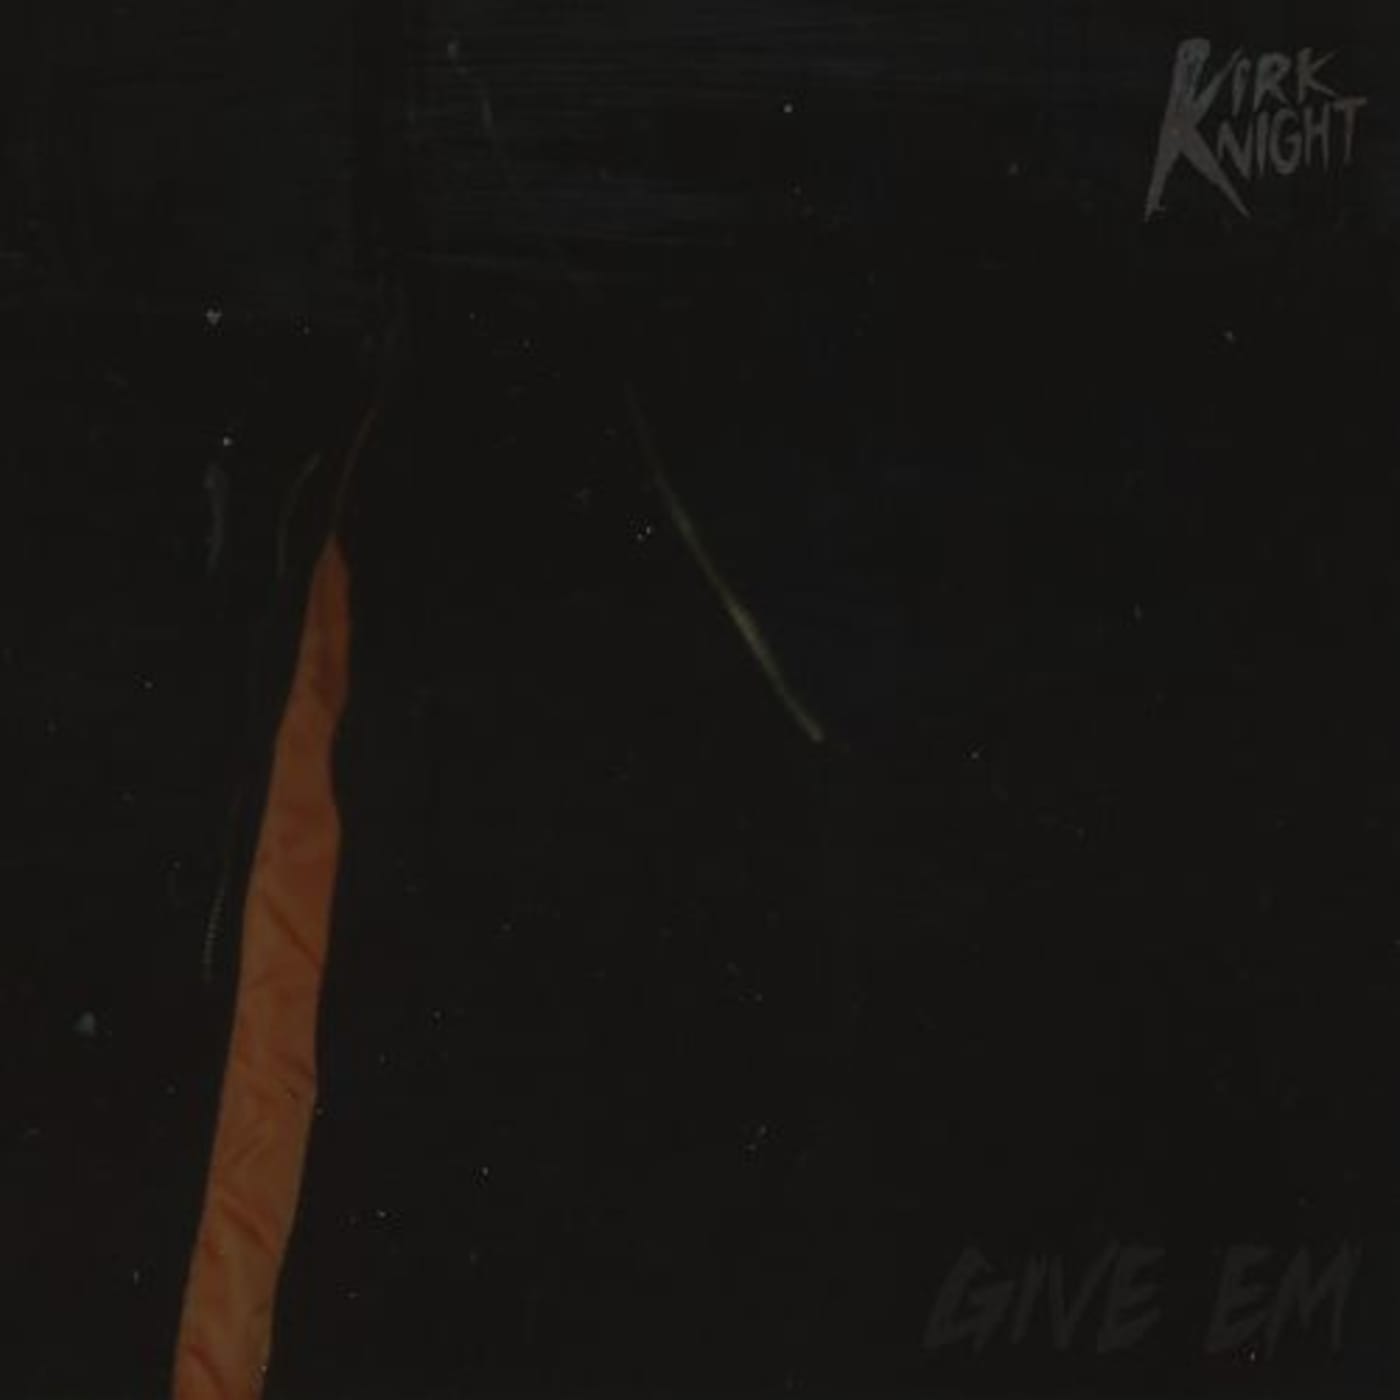 Pro Era’s Kirk Knight Spreads Something Fans’ Need In “Give ’Em” | Complex